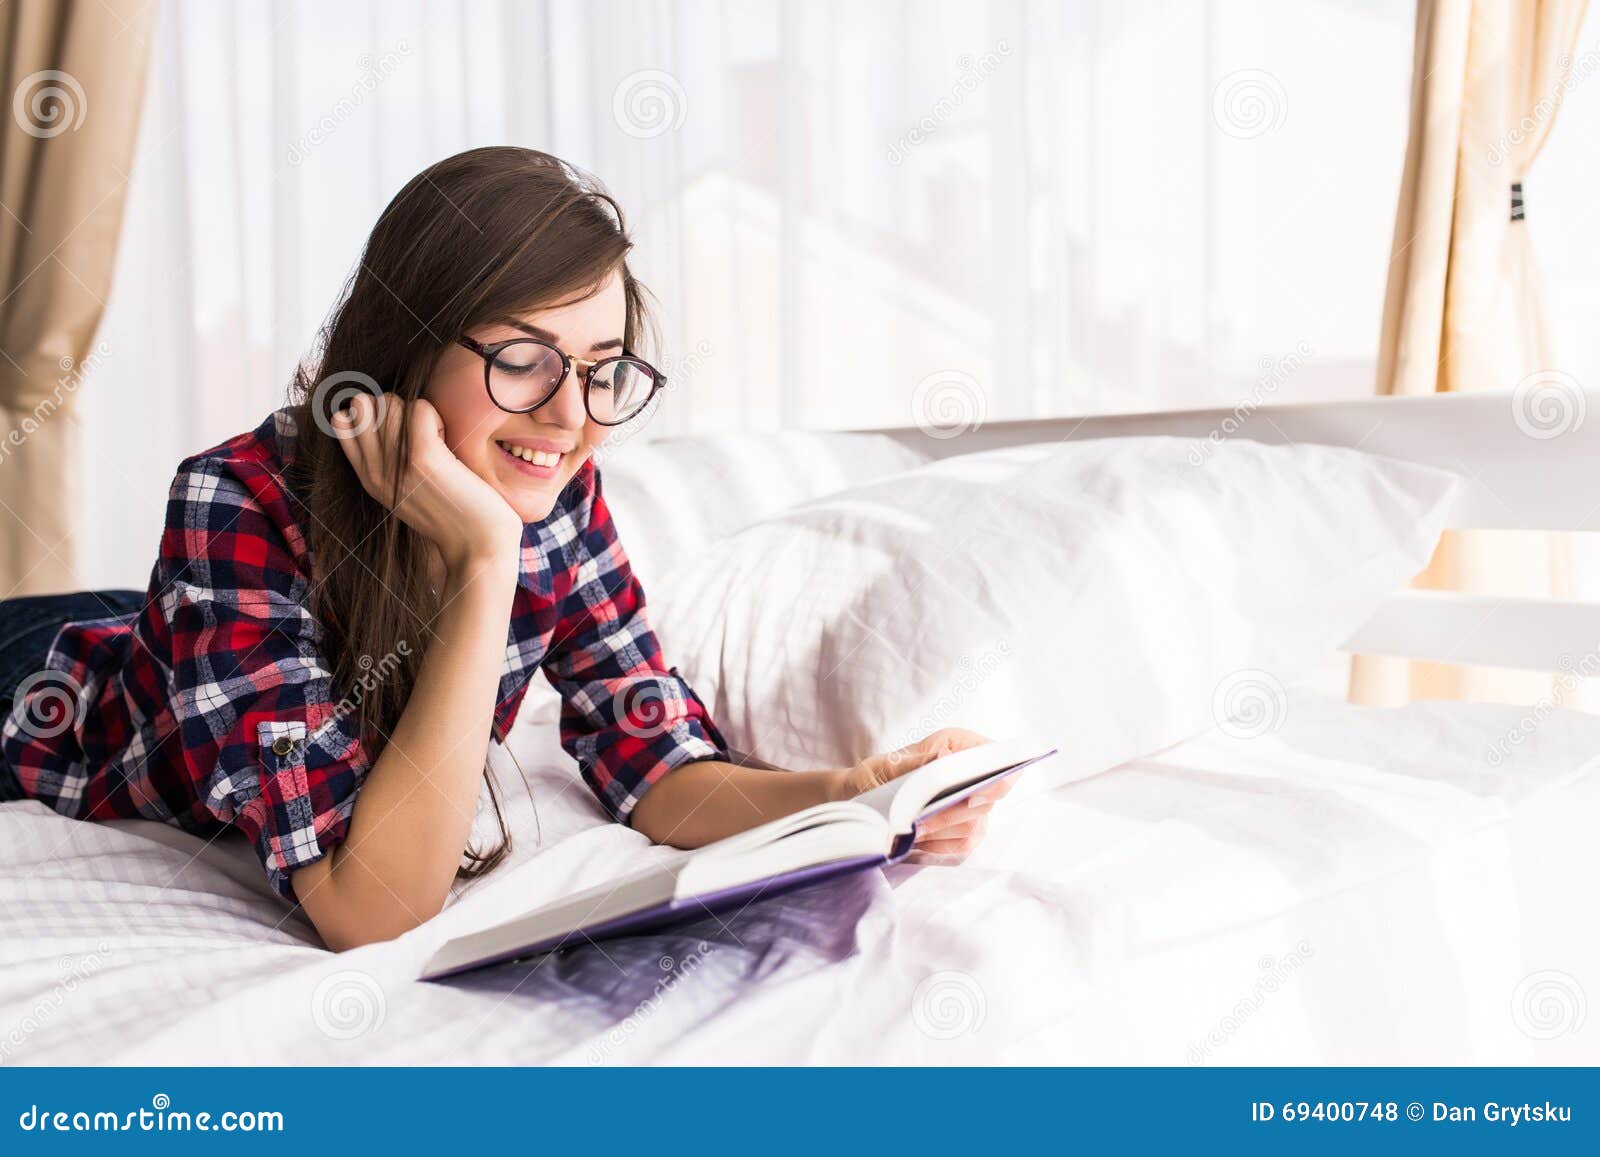 Girl Writing Book on the Bed Stock Photo - Image of leisure, closeup:  22568038